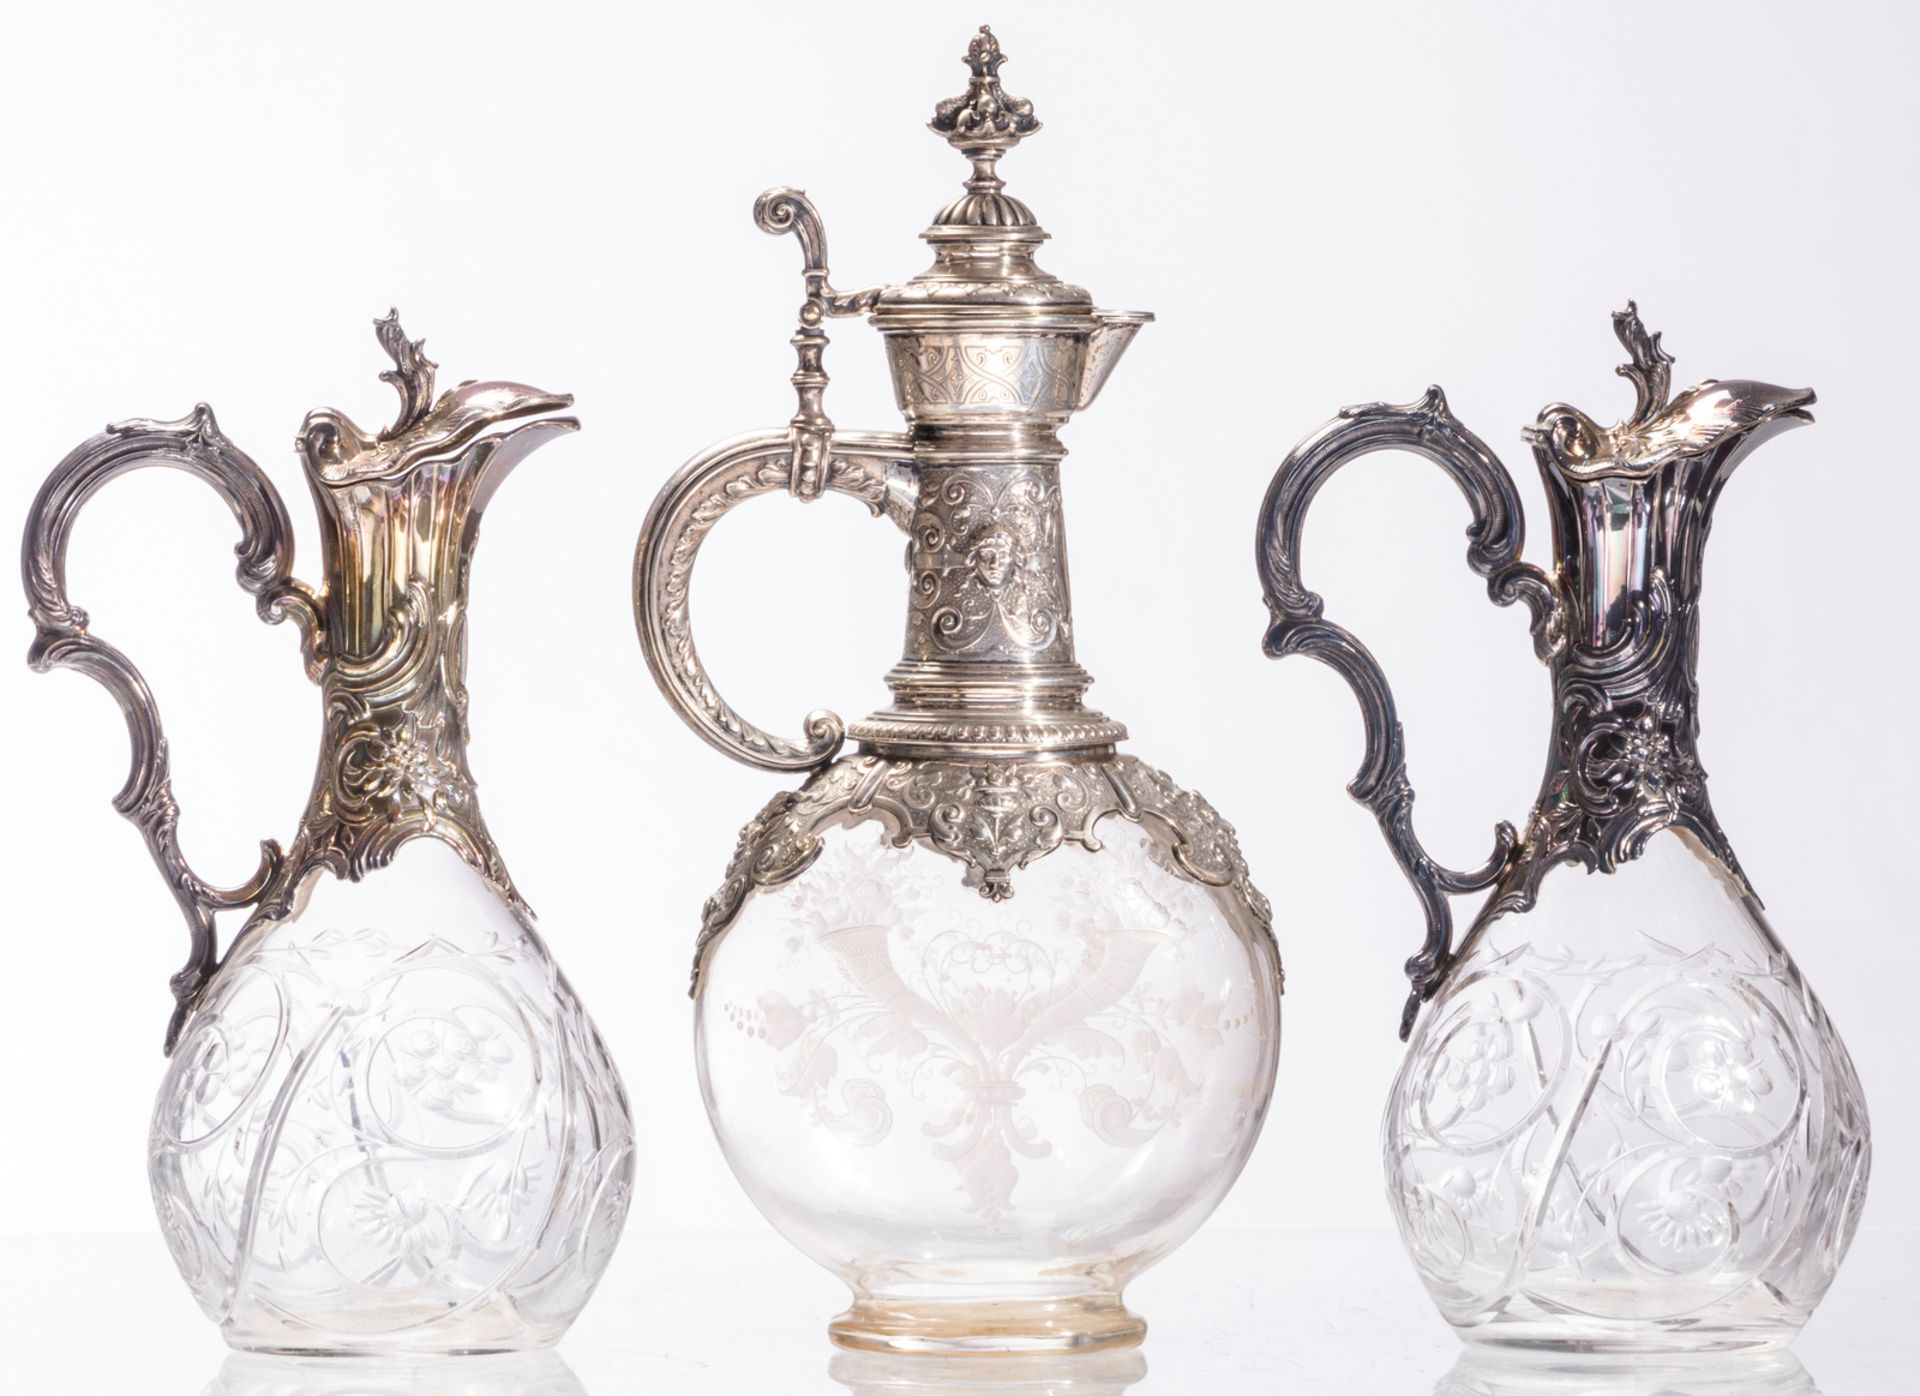 Two cut crystal liqueur decanters with Rococo revival silver mount, French export silver; added a - Image 3 of 7